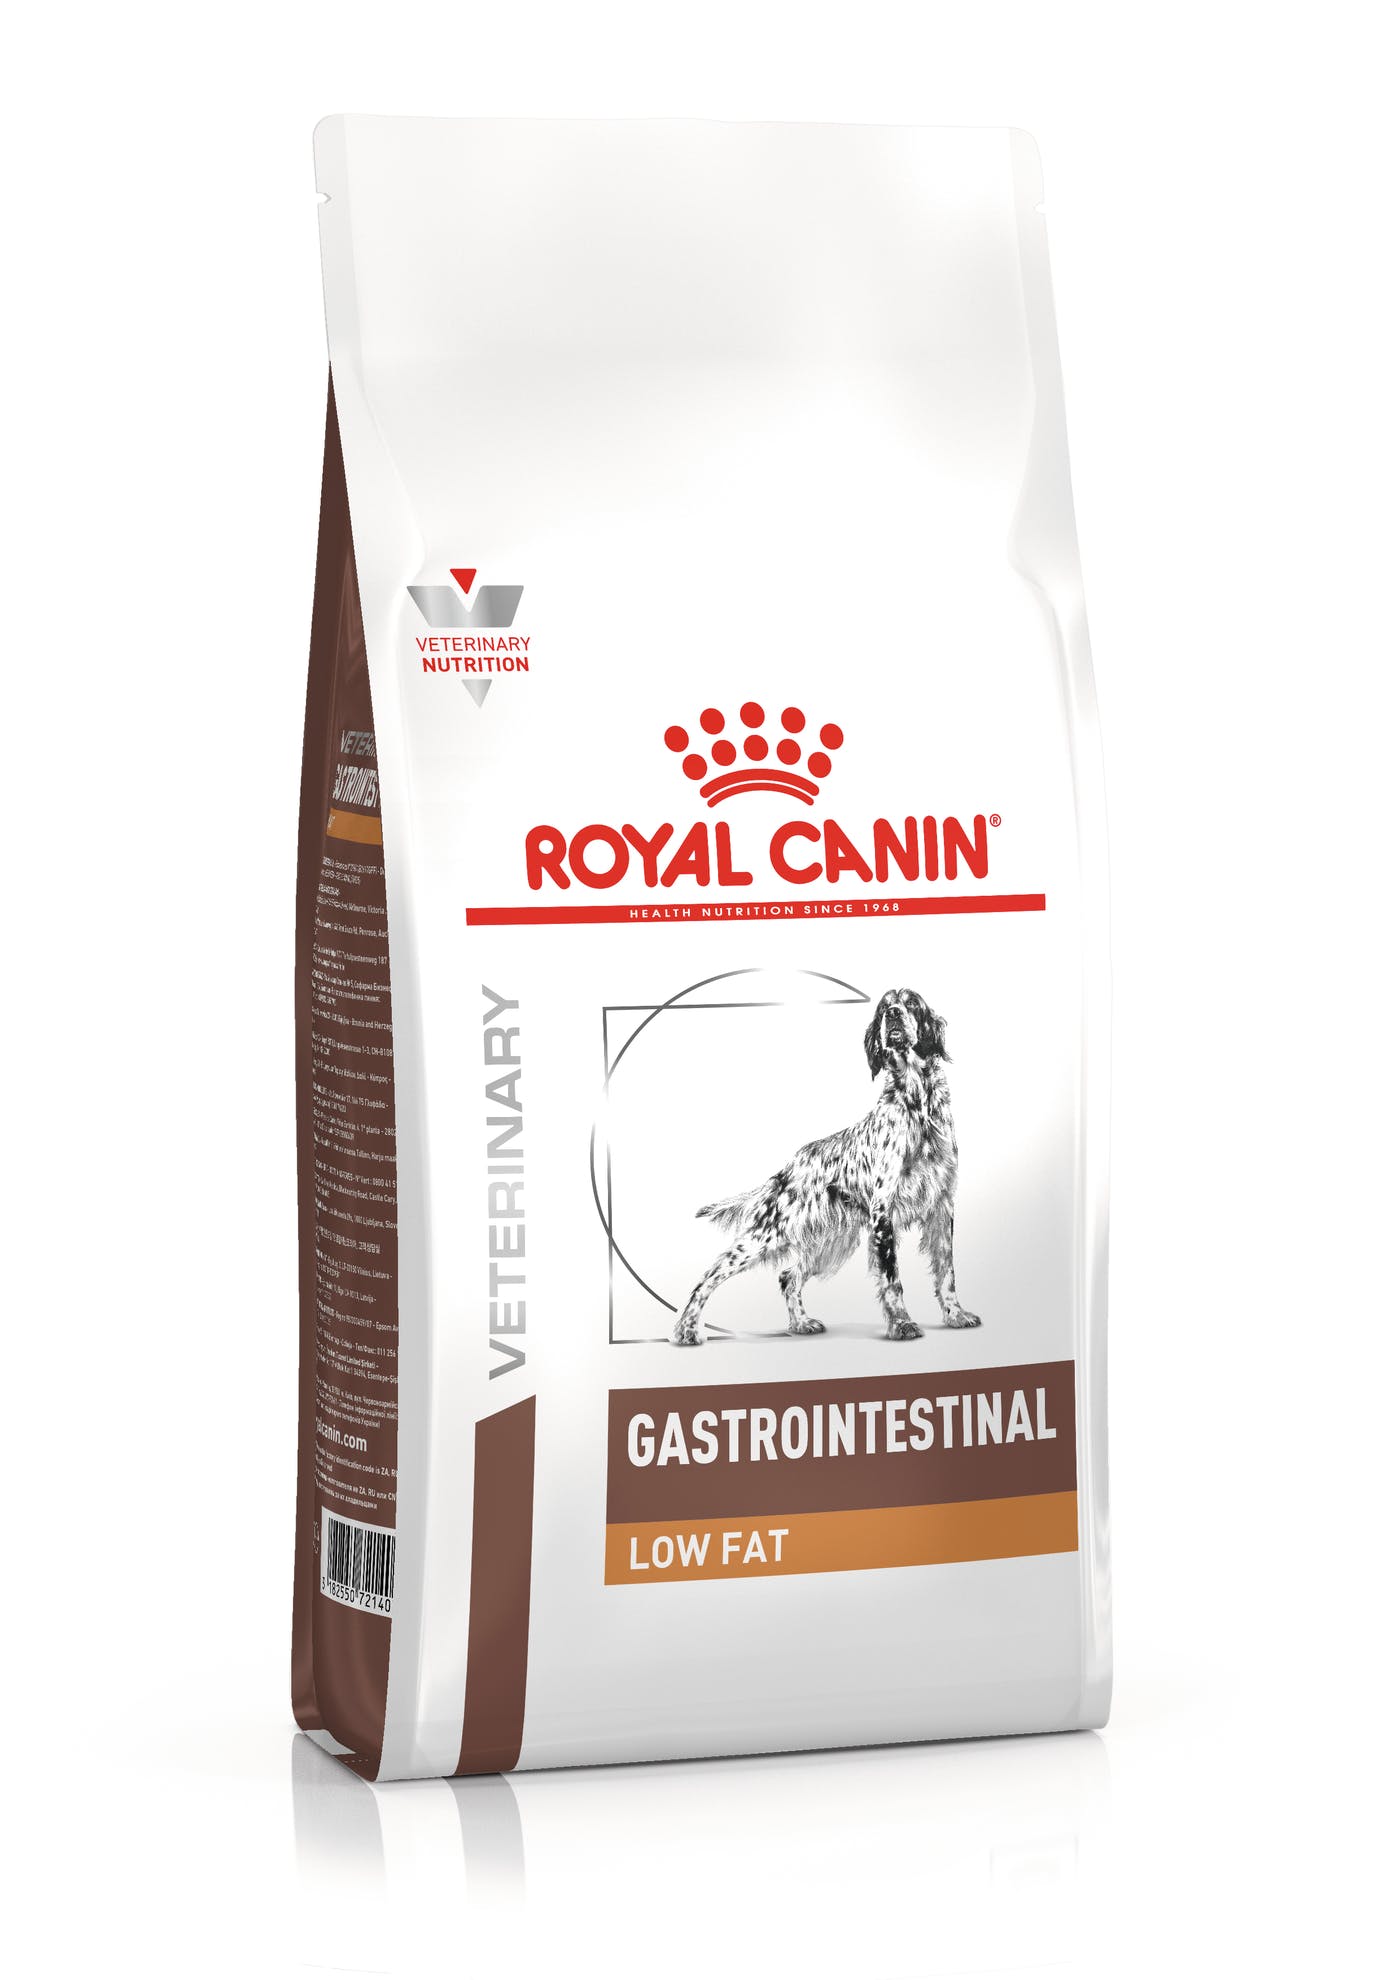 Royal Canin Gastrointestinal Low Fat Dry Canine (6.6lbs bag)